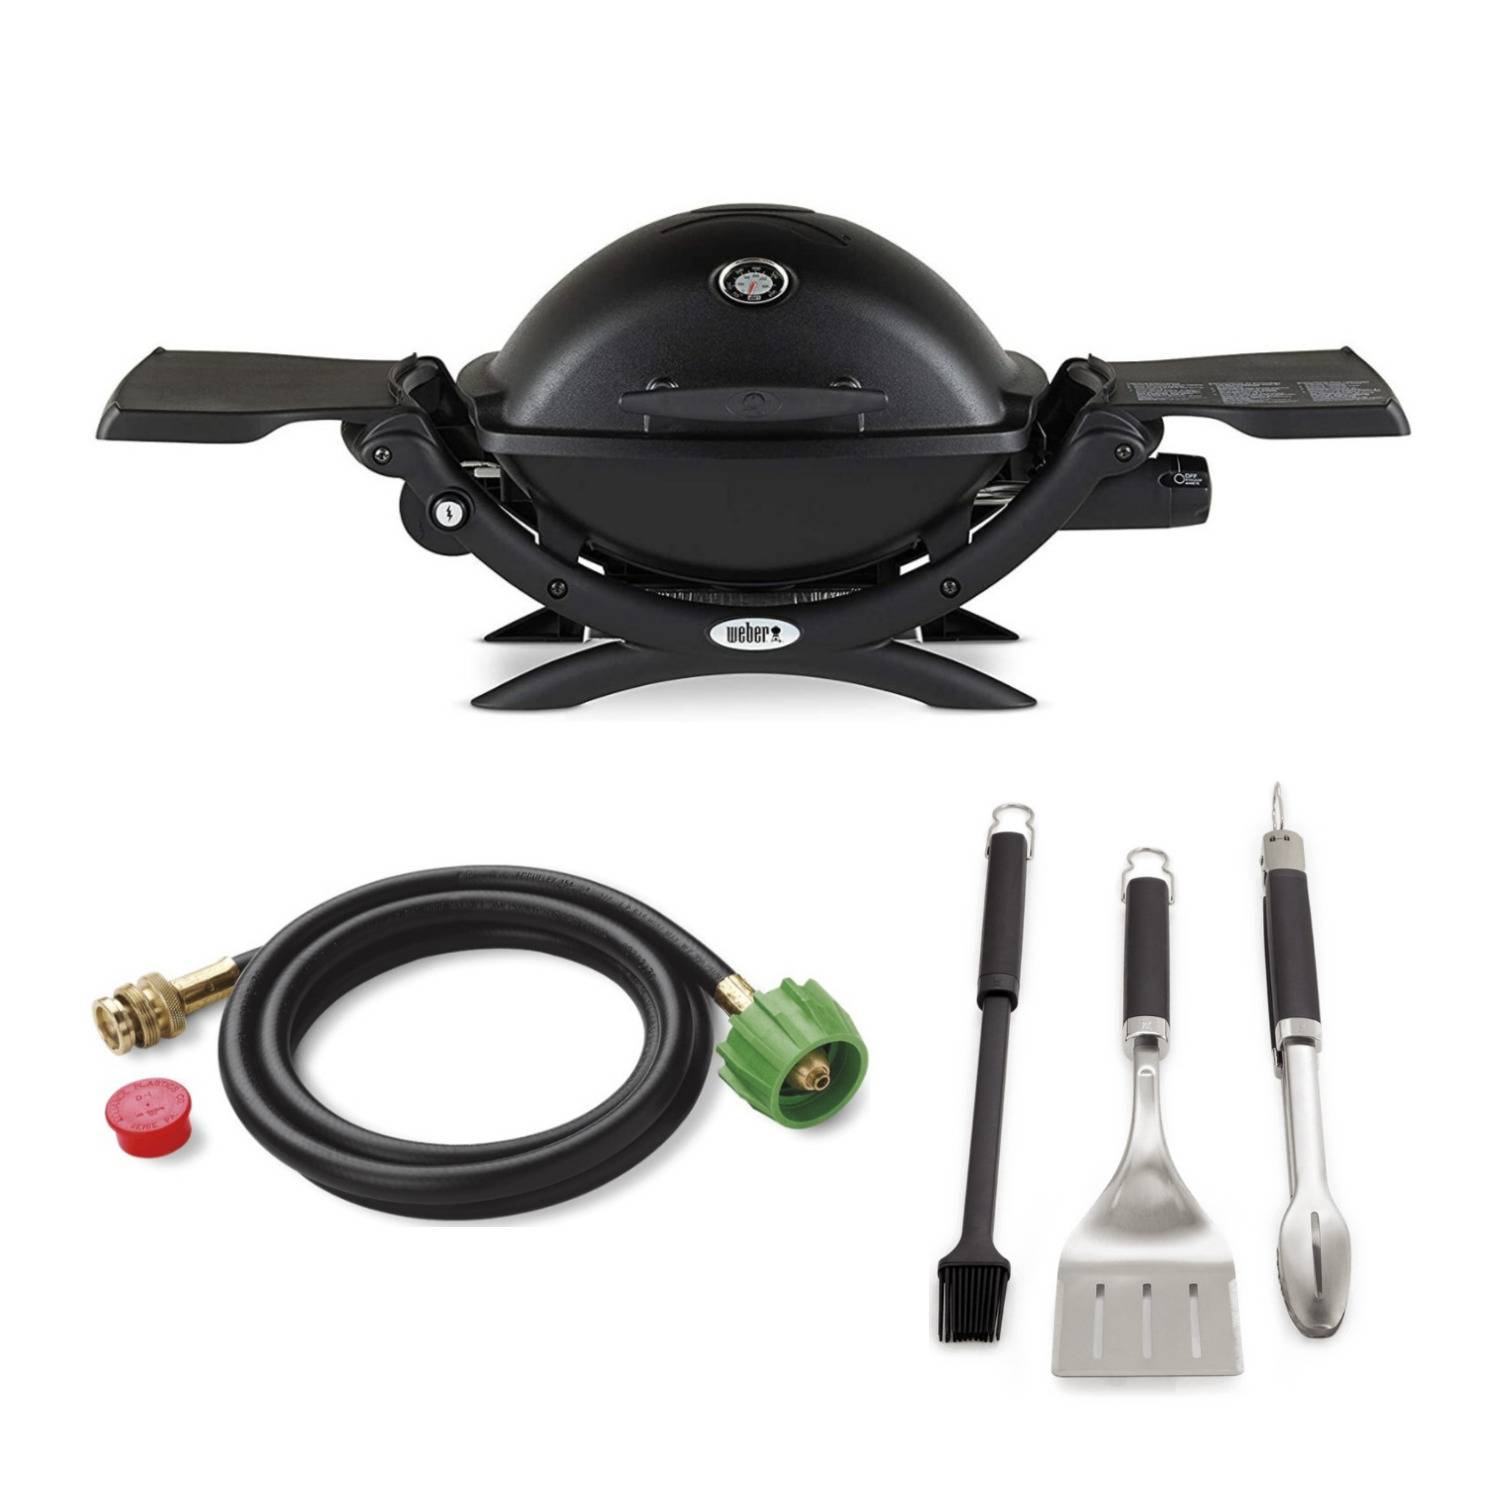 Weber Q 1200 Gas Grill (Black) with Adapter Hose and 3-Piece Grilling Tool Set